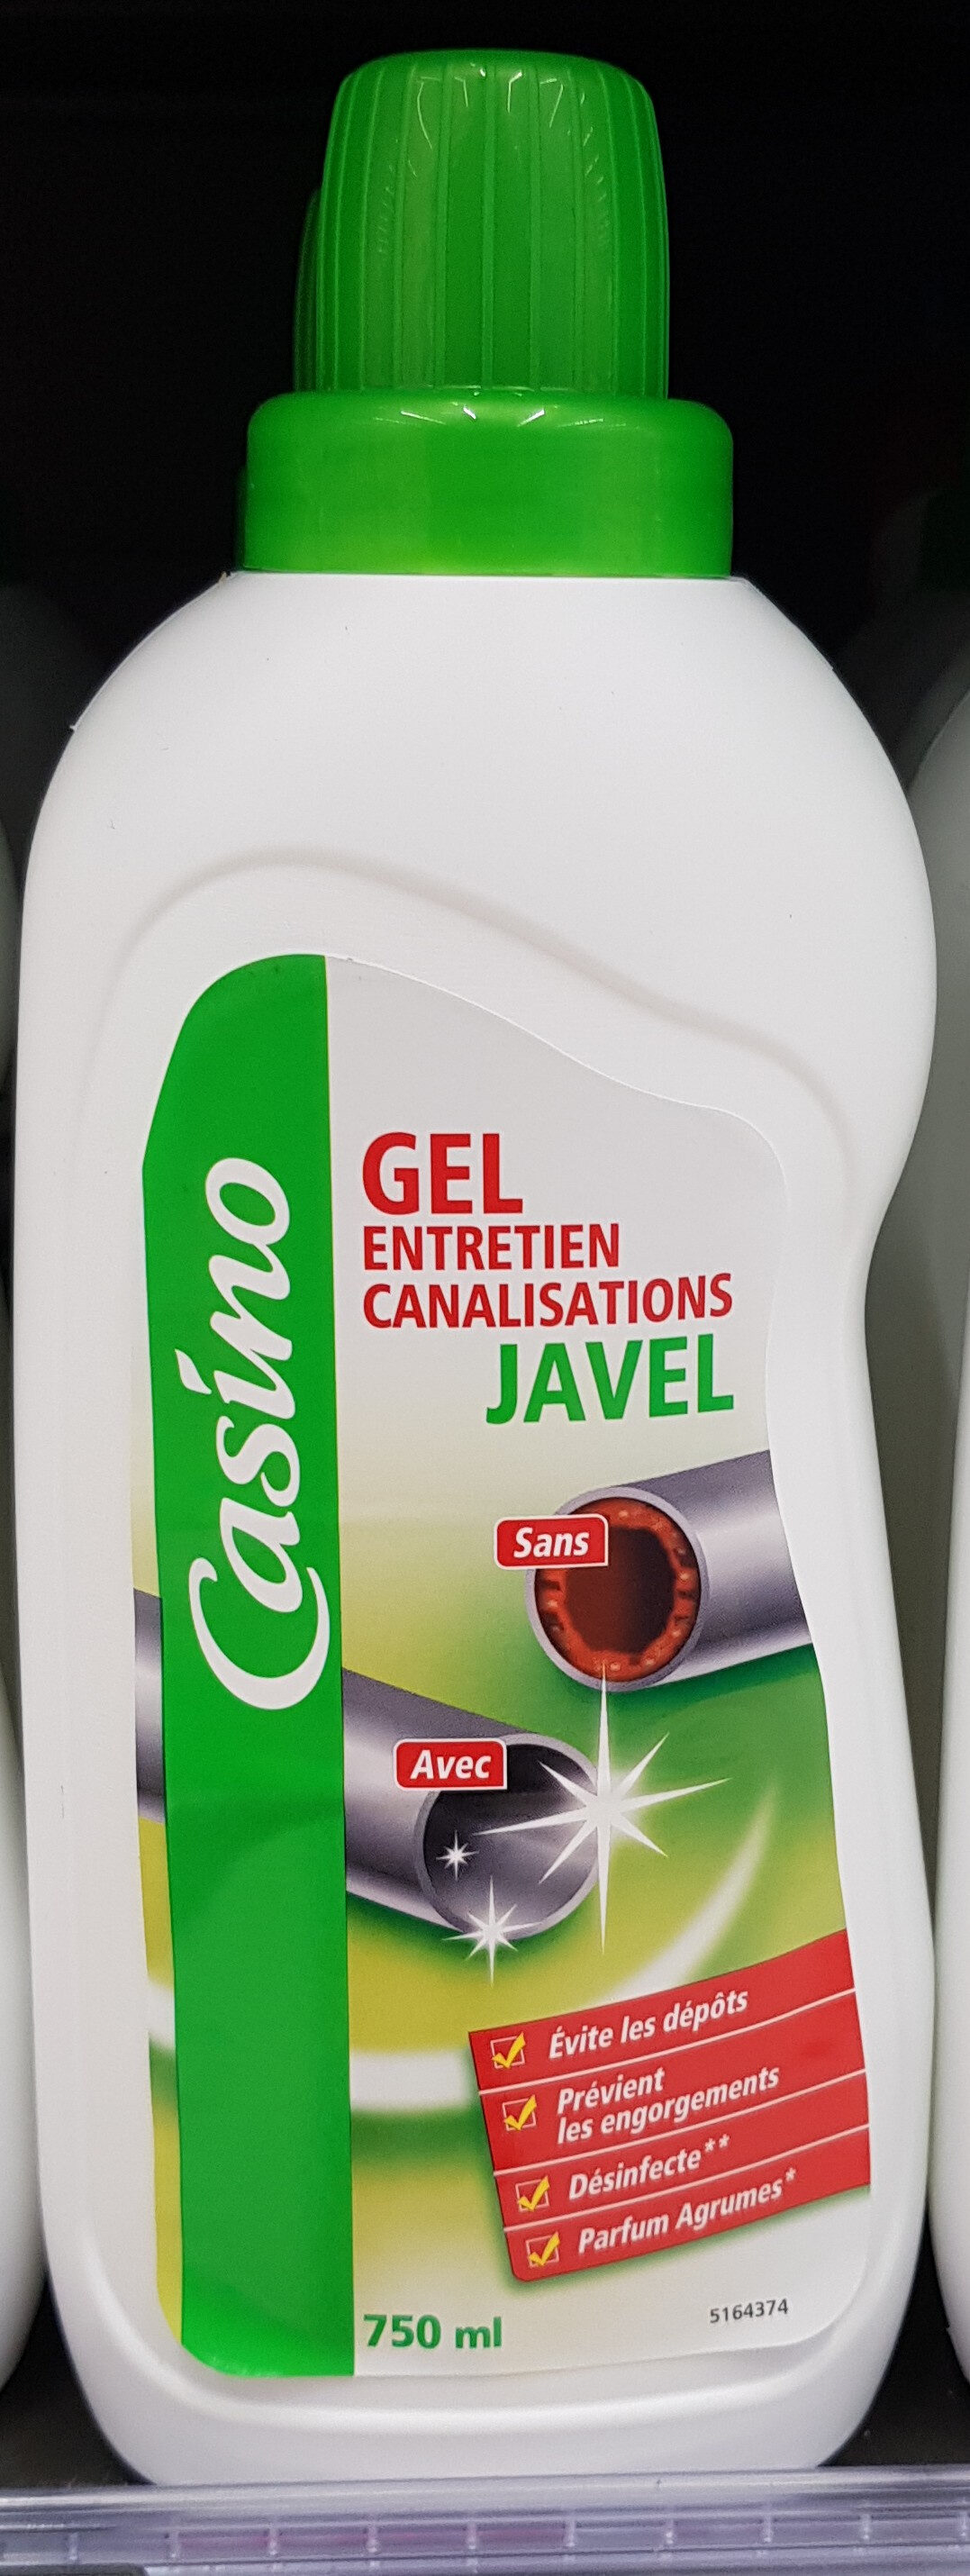 Gel WC entretien canal Javel casino - Product - fr